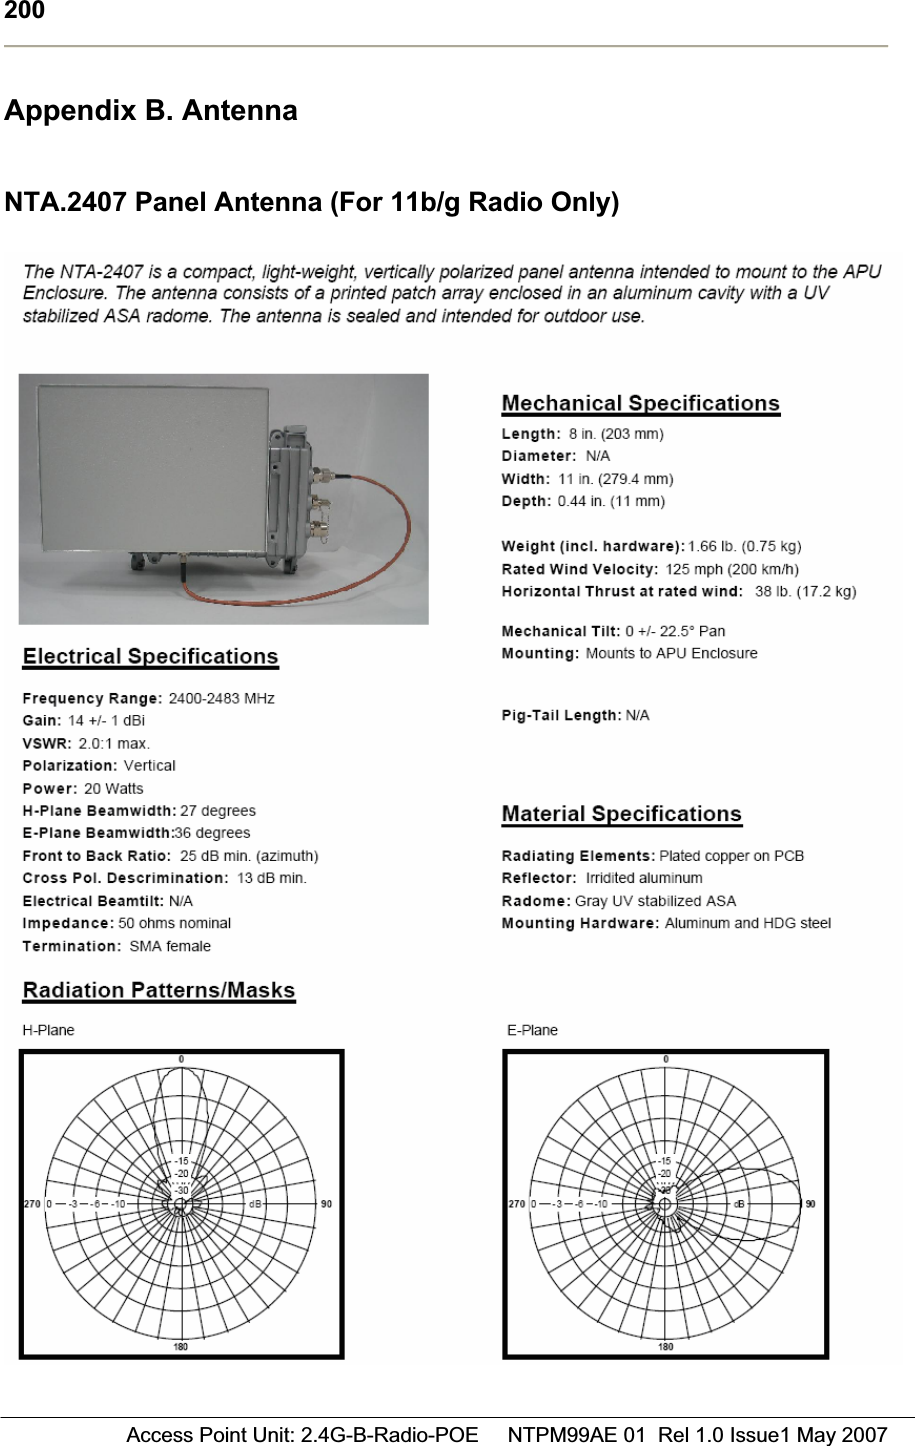 200 Access Point Unit: 2.4G-B-Radio-POE     NTPM99AE 01  Rel 1.0 Issue1 May 2007Appendix B. Antenna  NTA.2407 Panel Antenna (For 11b/g Radio Only) 